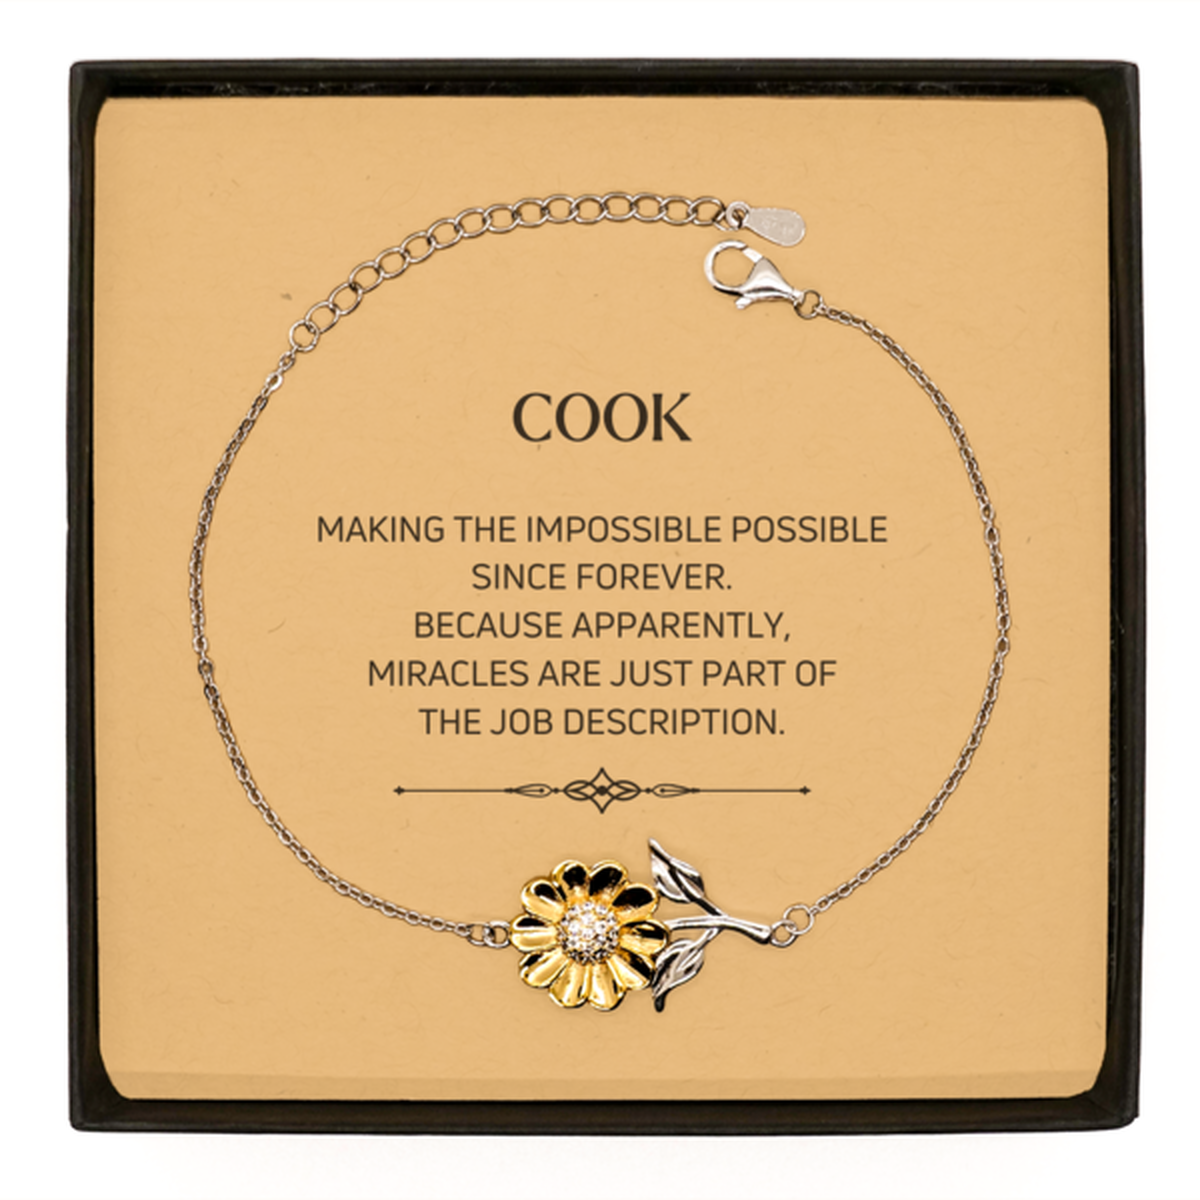 Funny Cook Gifts, Miracles are just part of the job description, Inspirational Birthday Sunflower Bracelet For Cook, Men, Women, Coworkers, Friends, Boss